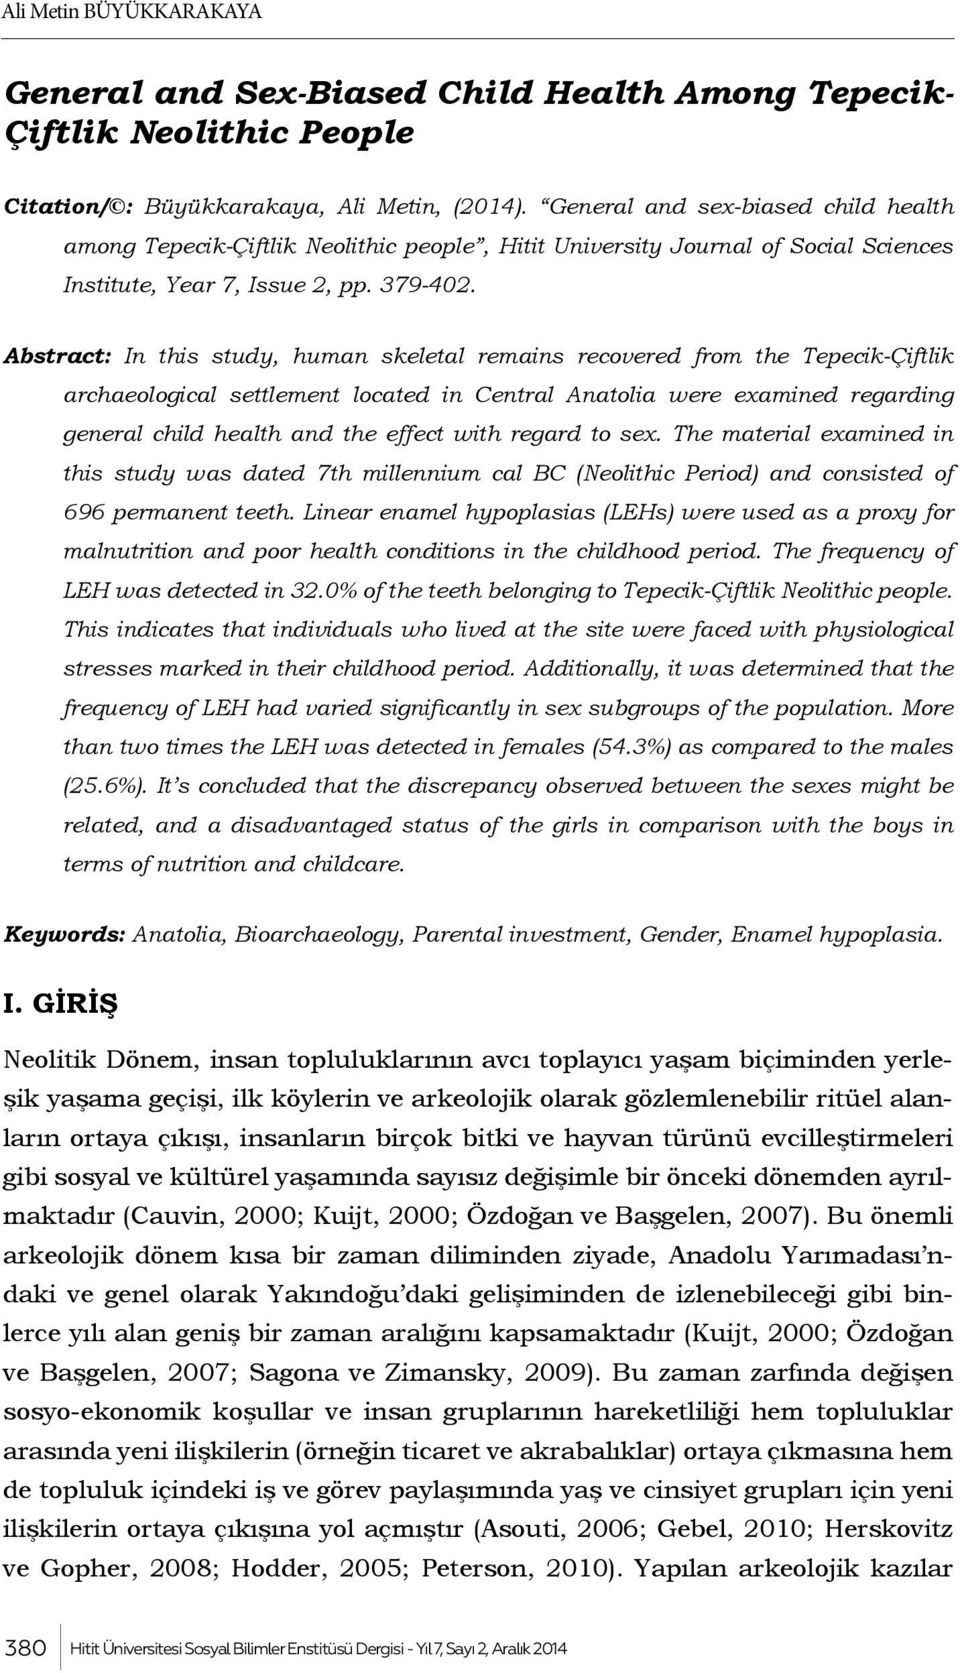 Abstract: In this study, human skeletal remains recovered from the Tepecik-Çiftlik archaeological settlement located in Central Anatolia were examined regarding general child health and the effect